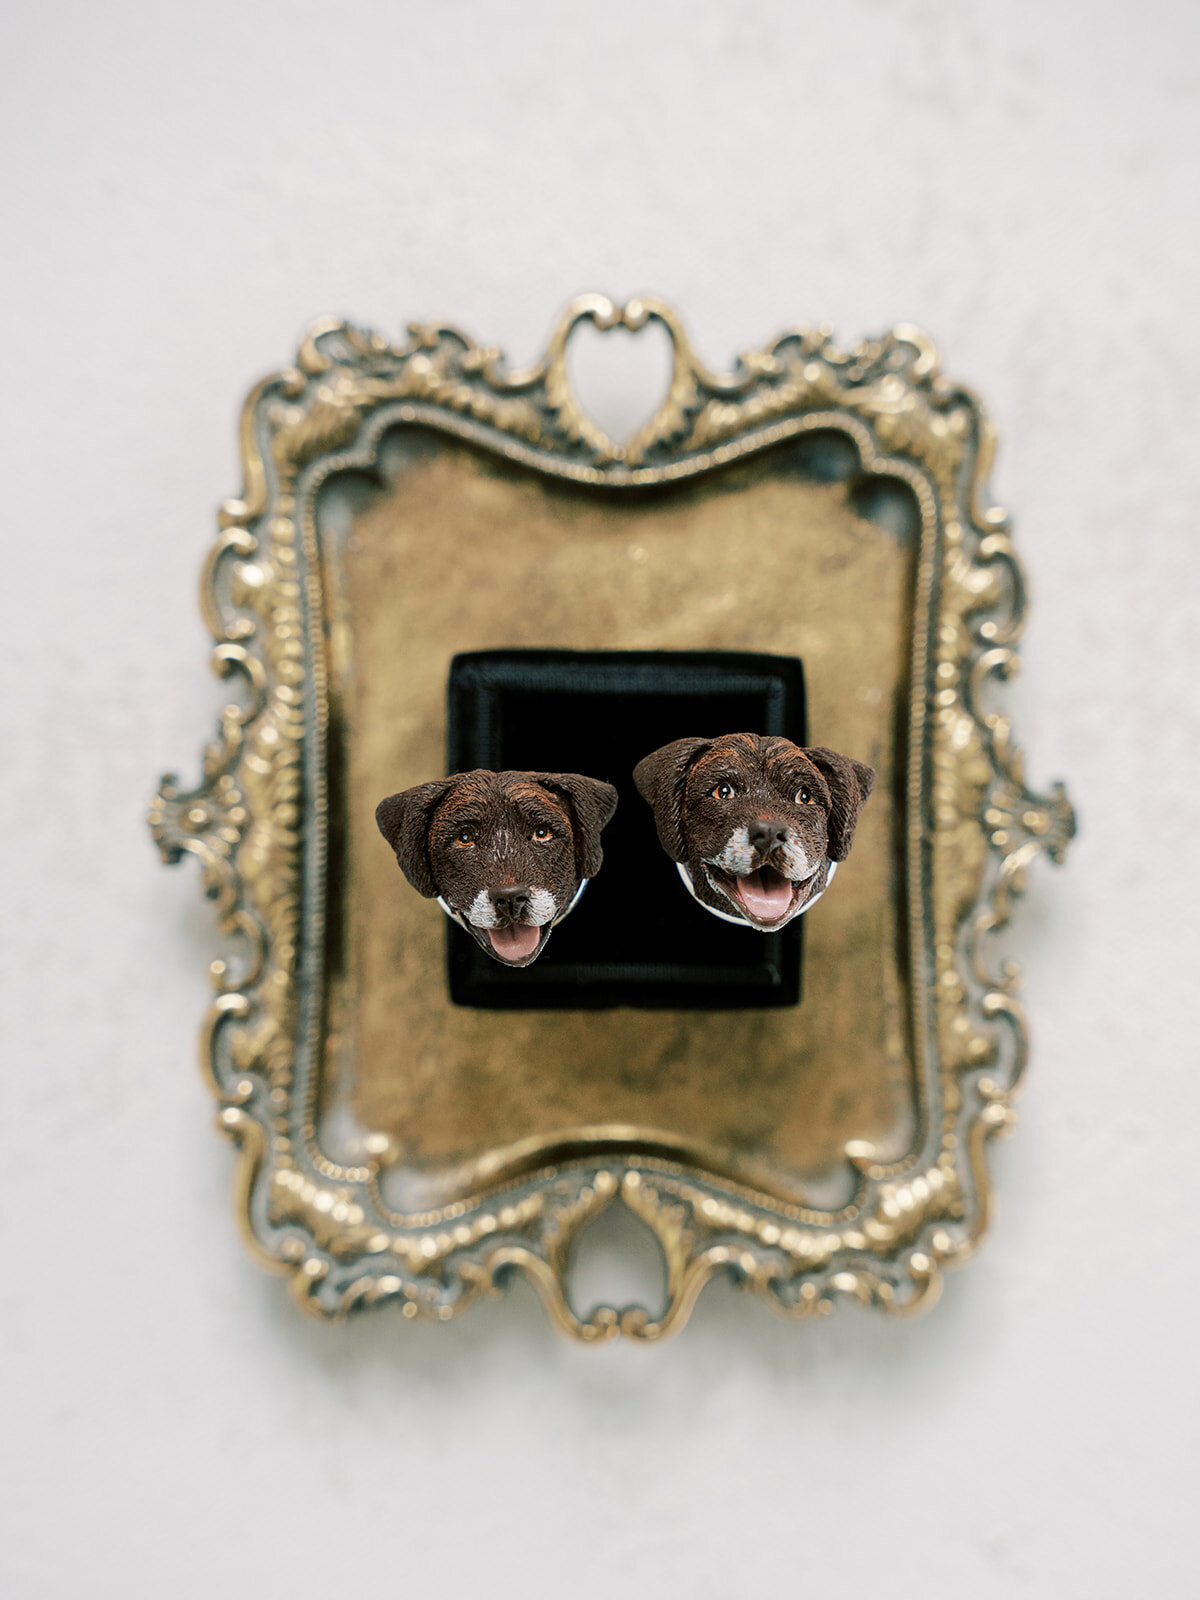 Cufflinks with face of pup  on them.